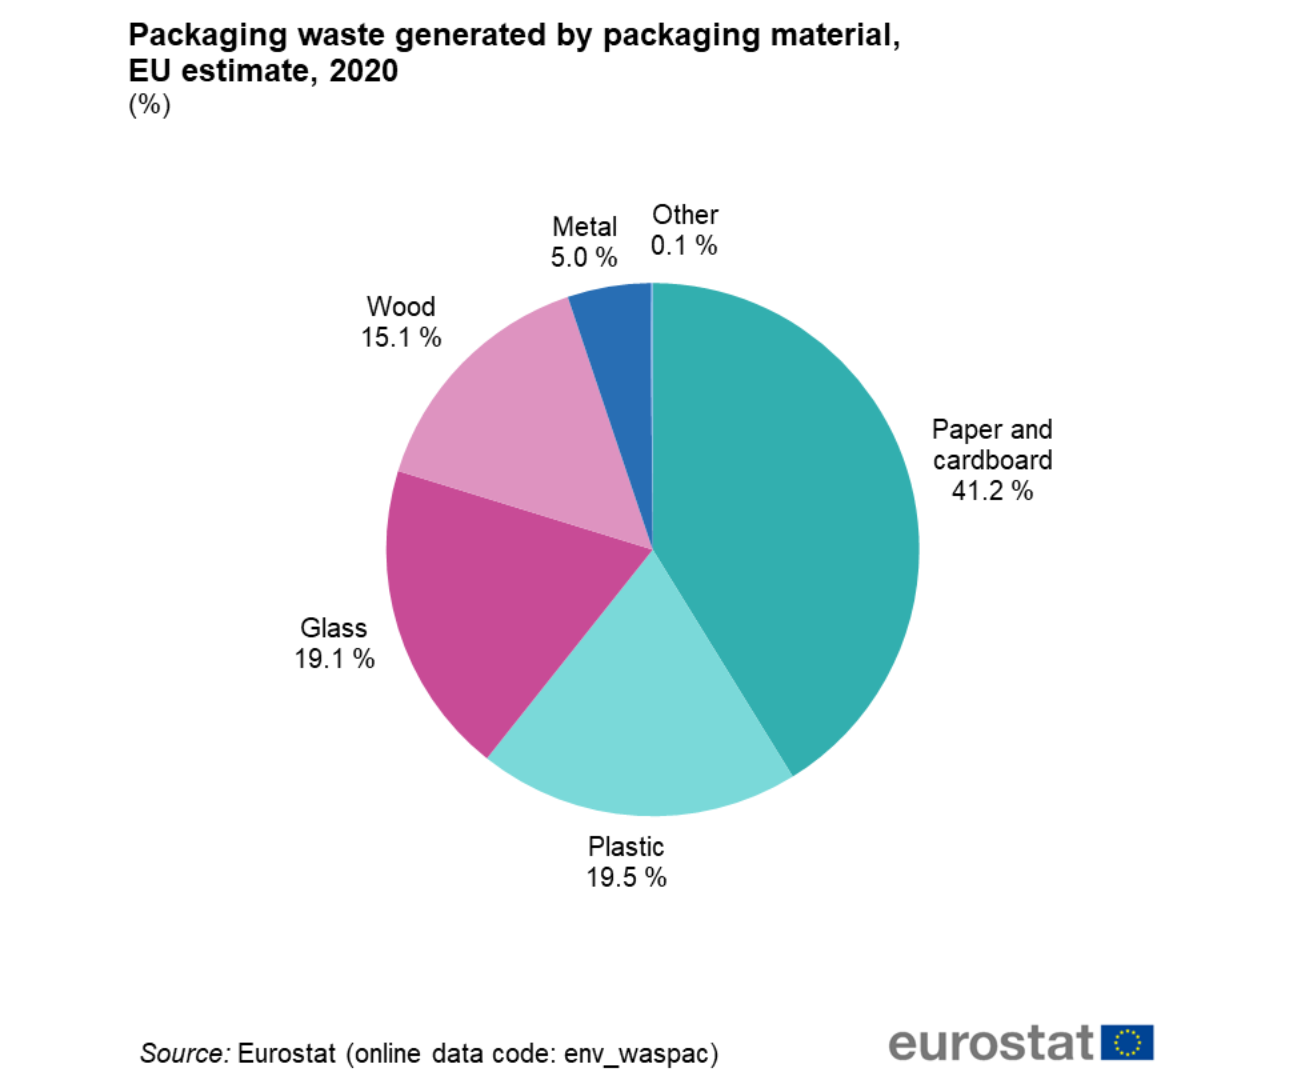 According to Eurostat, paper and cardboard remained the main packaging waste material in European Union (41.2%), followed by plastic (19.5%), glass (19.1), wood (15.1) and metal (5%). 